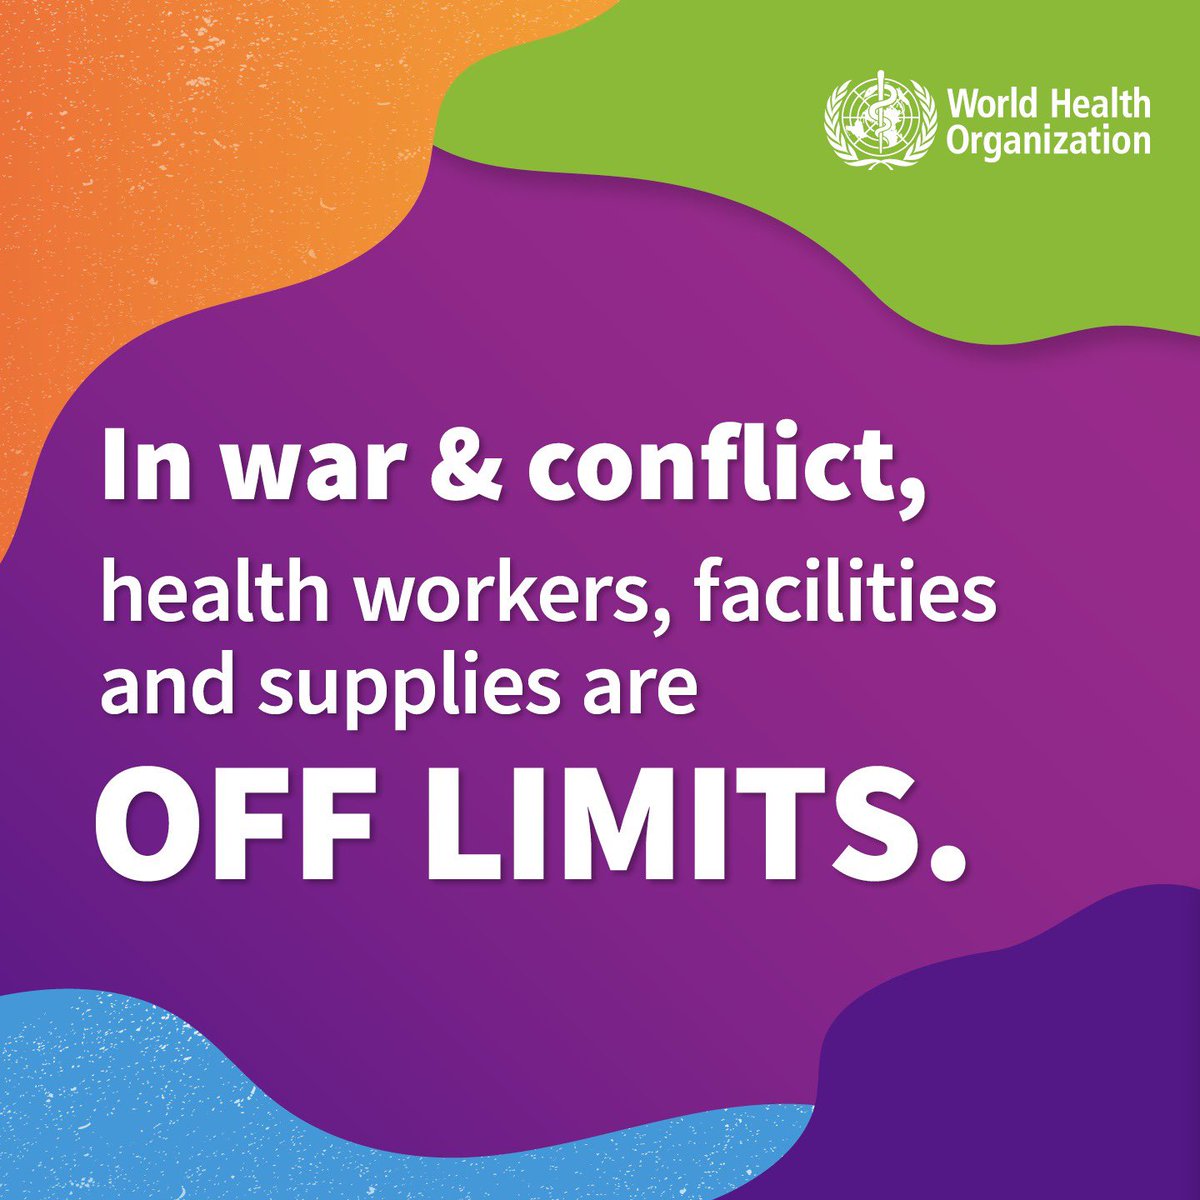 This #WorldHealthDay comes at a time of tragic conflicts around the world. We call on all parties to conflict to safeguard the right to health: -protect health infrastructure and health workers; -ensure uninterrupted access to health services, in adherence to international